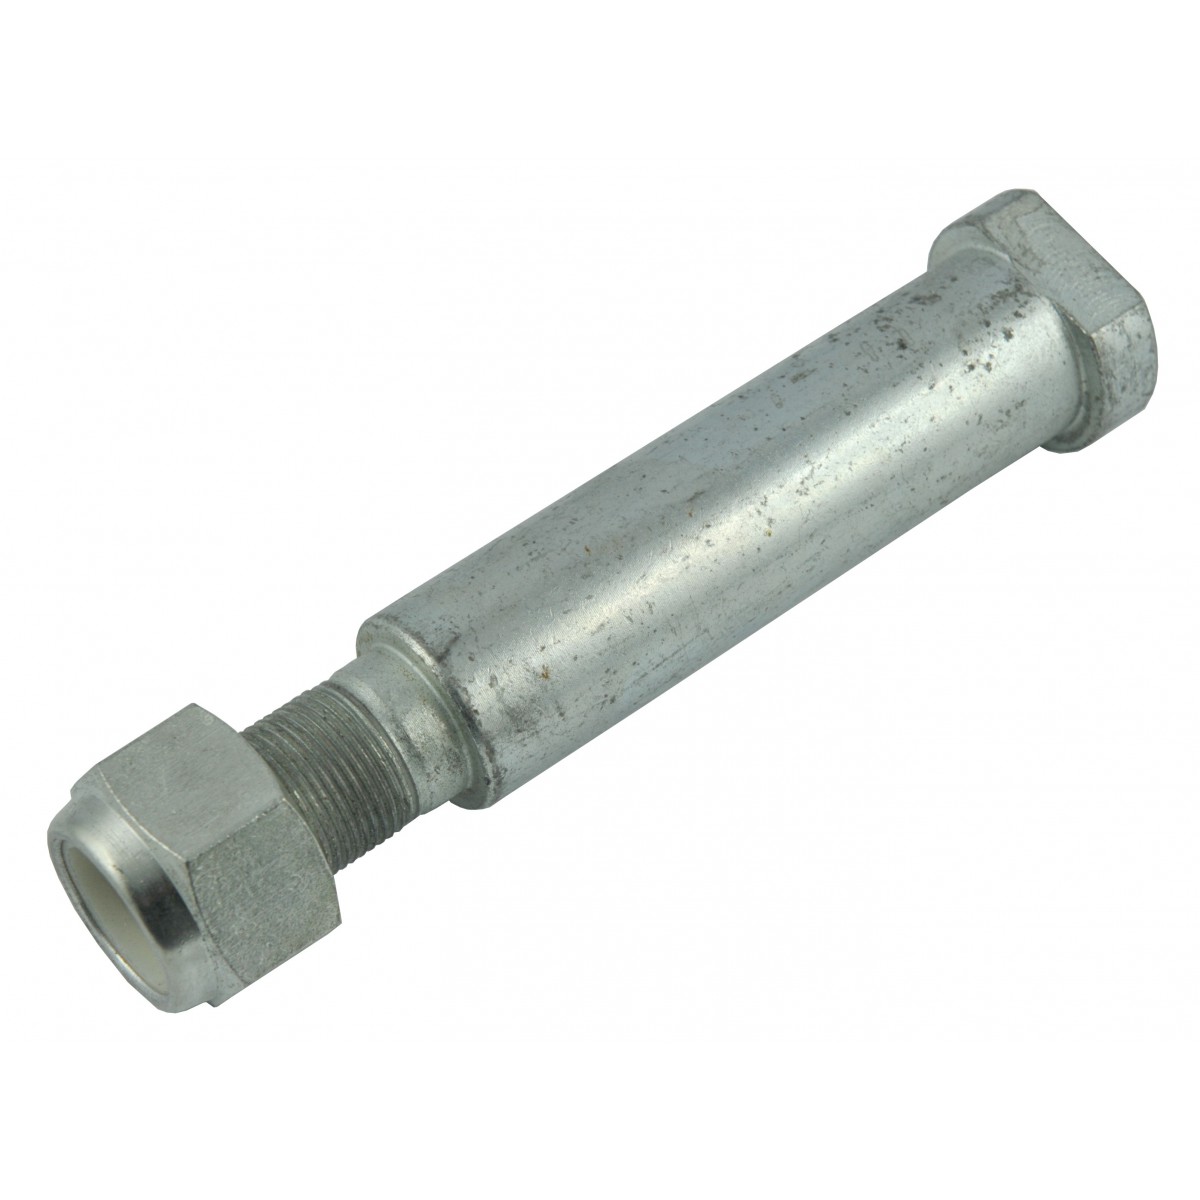 Bolt with thread and nut 213 x 40 mm of the arm of the rear-side flail mower AGL125